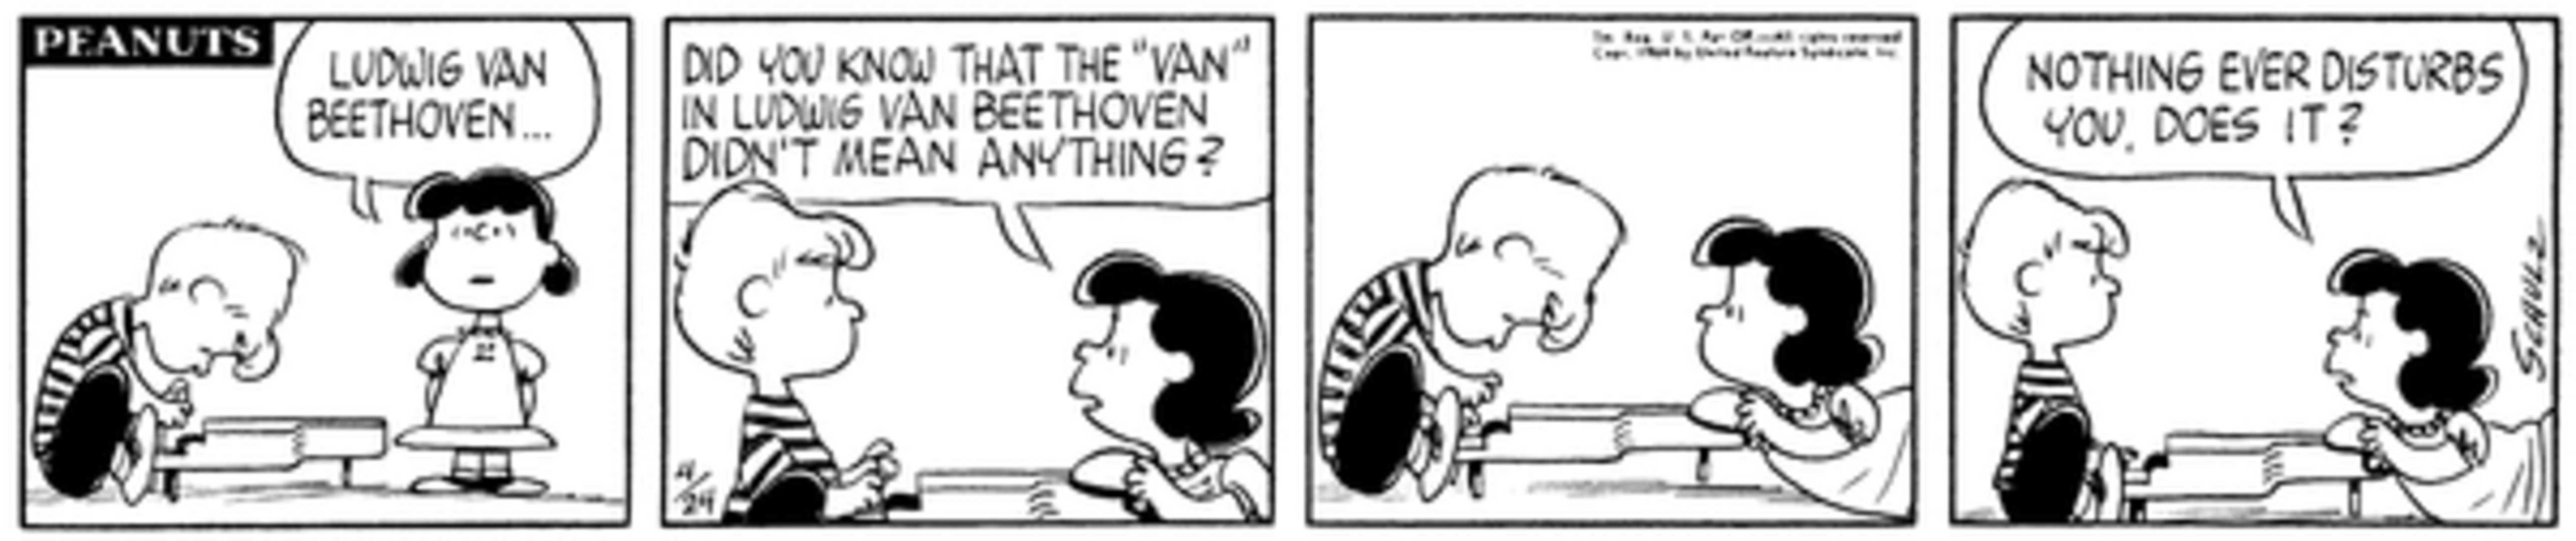 Schroeder and Lucy in Peanuts.